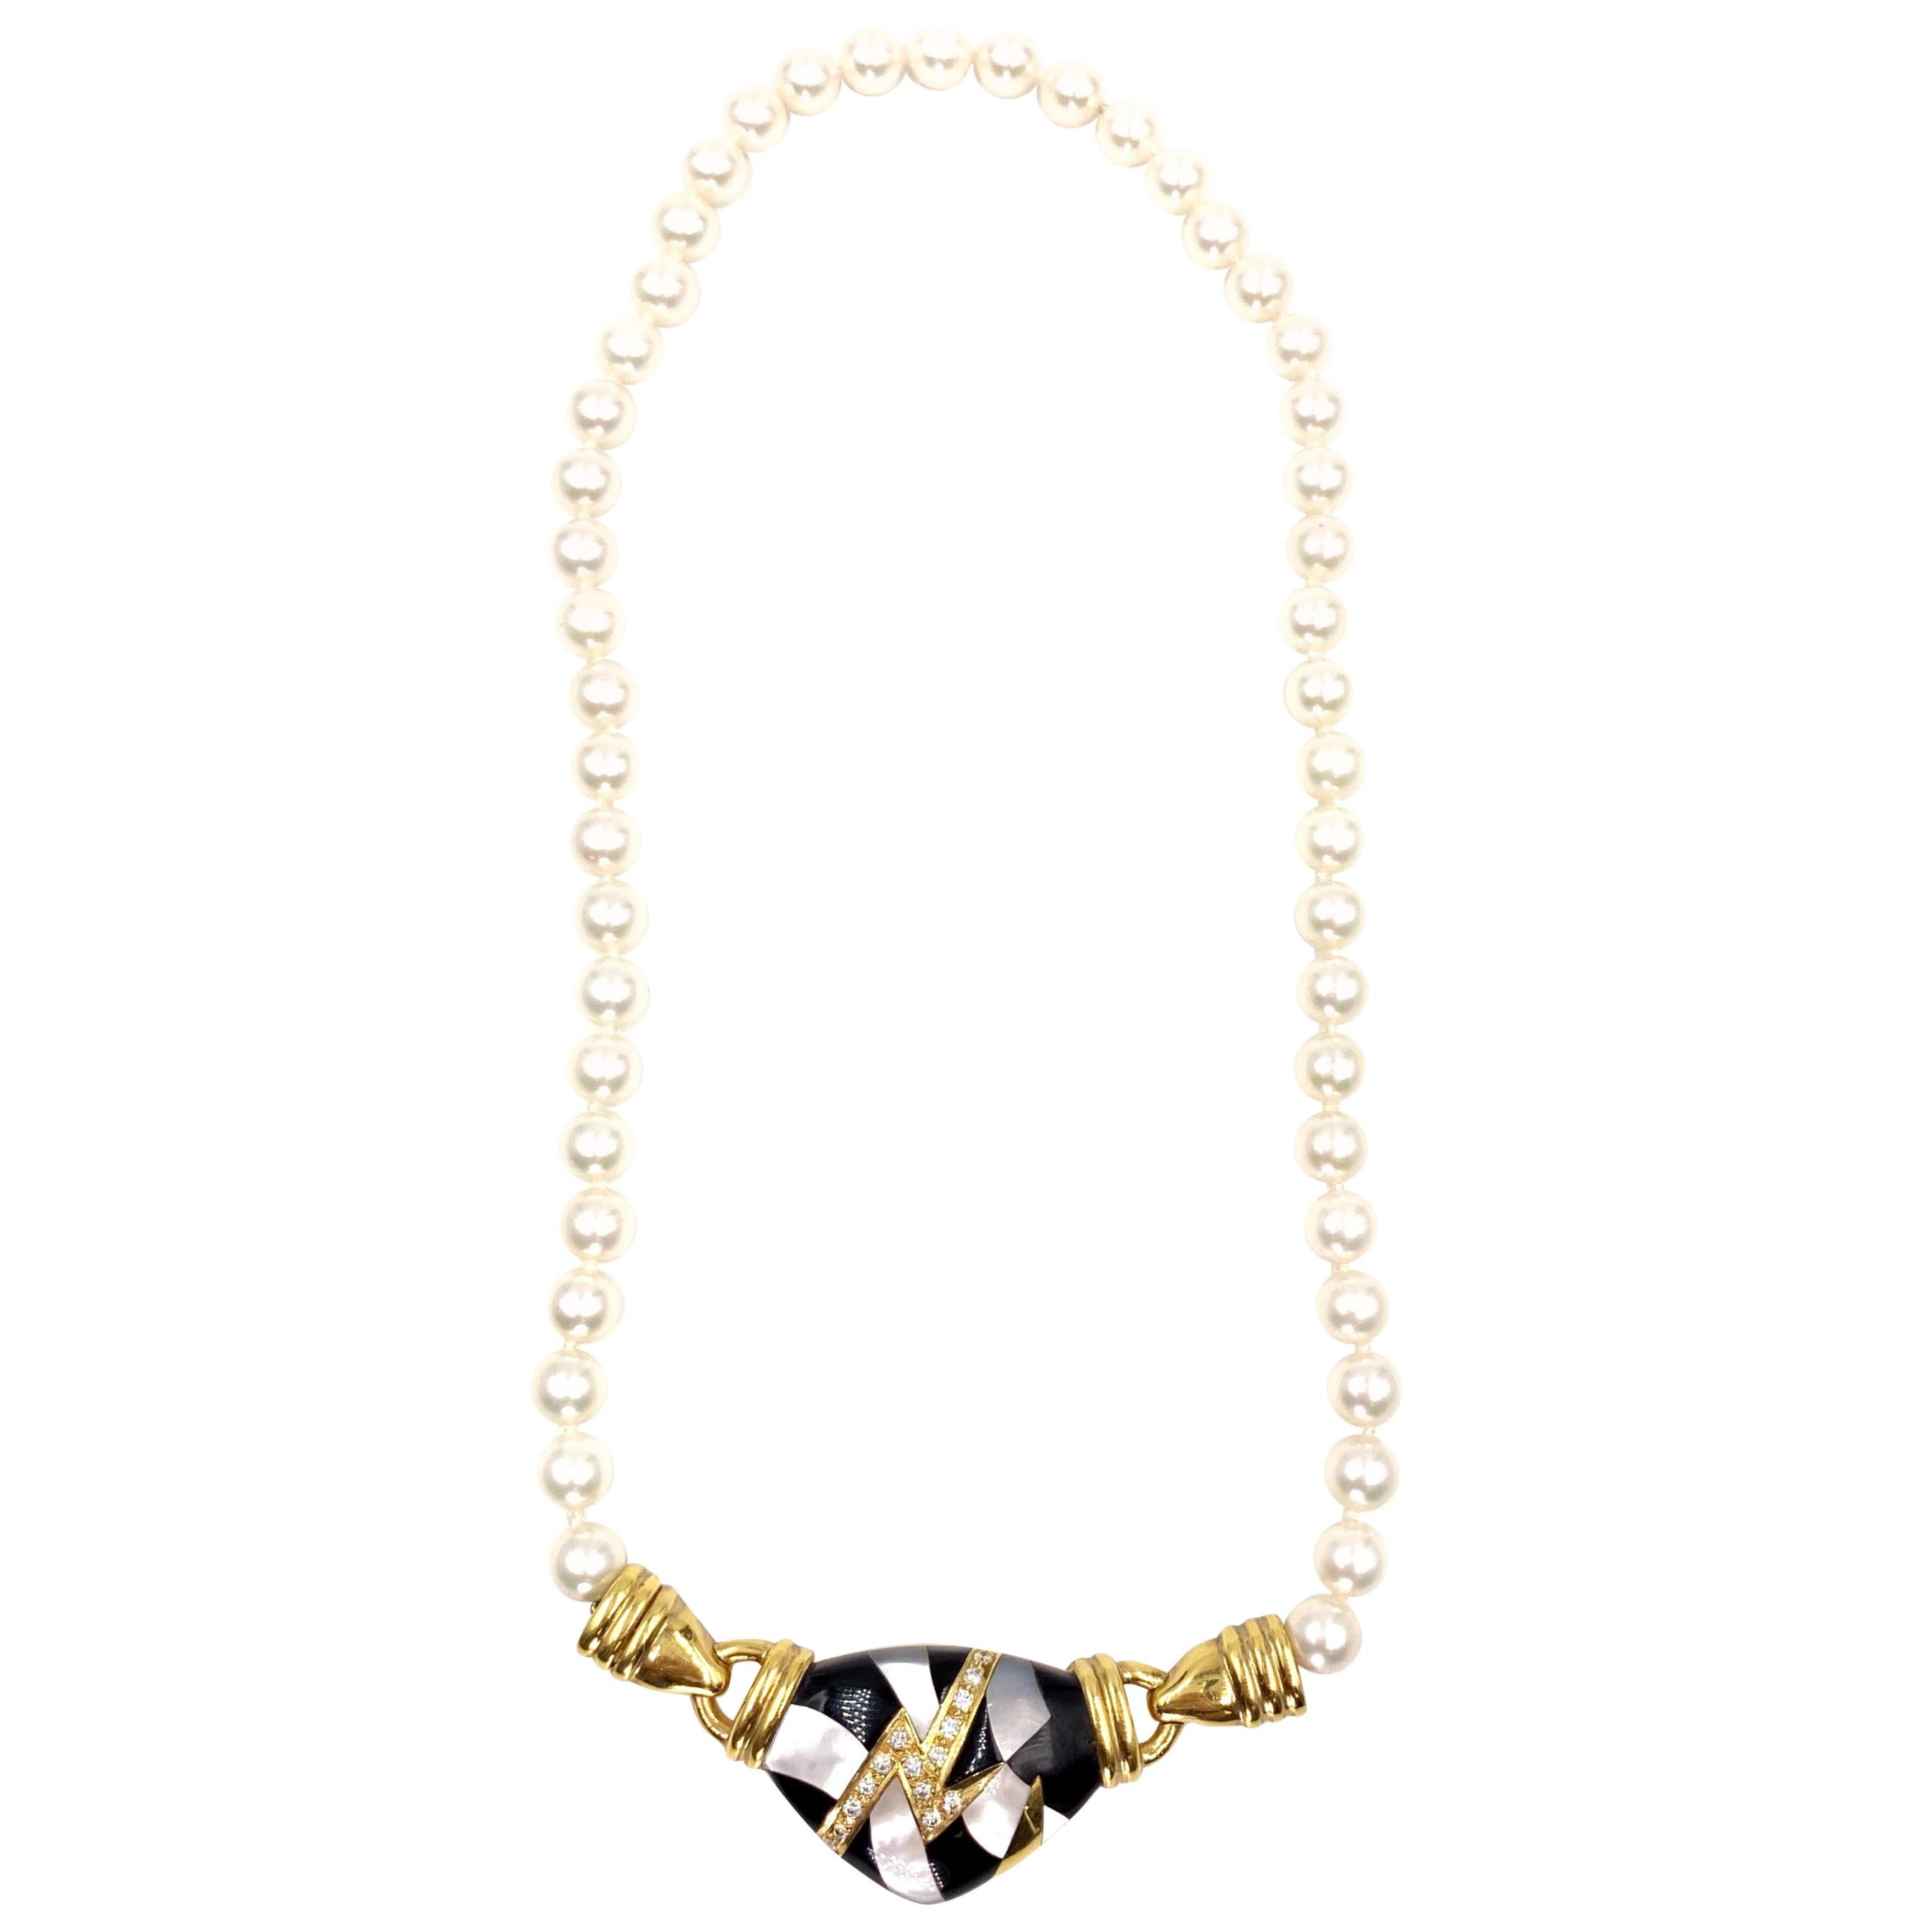 18 Karat Pearl Necklace with Diamond and Inlaid Stone Center For Sale